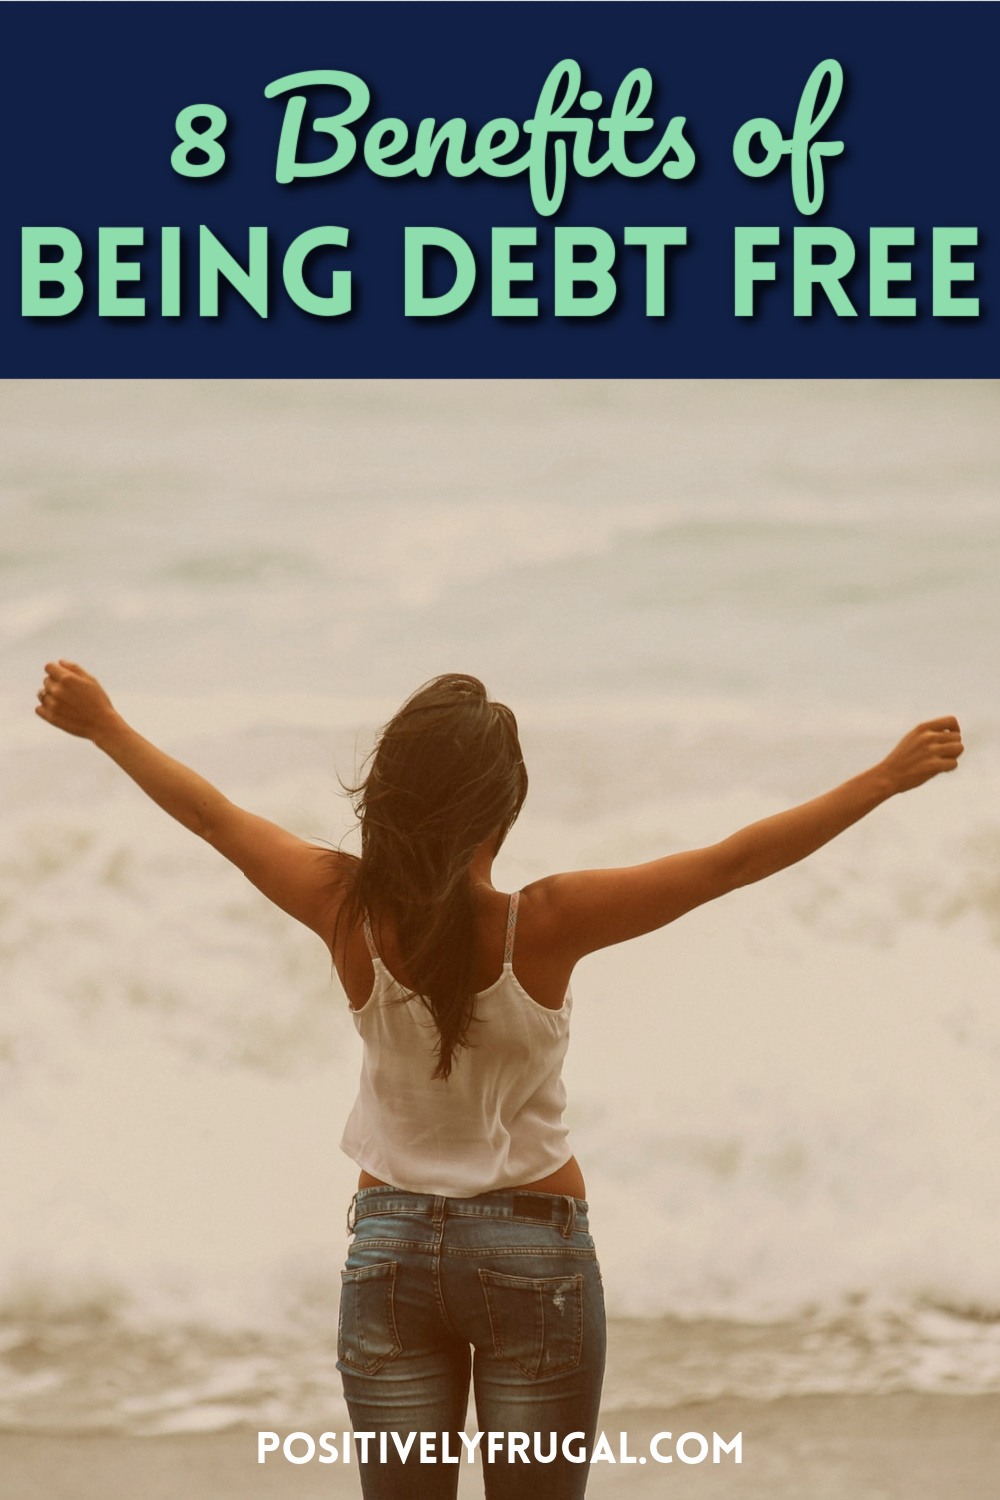 Benefits of Being Debt Free by PositivelyFrugal.com